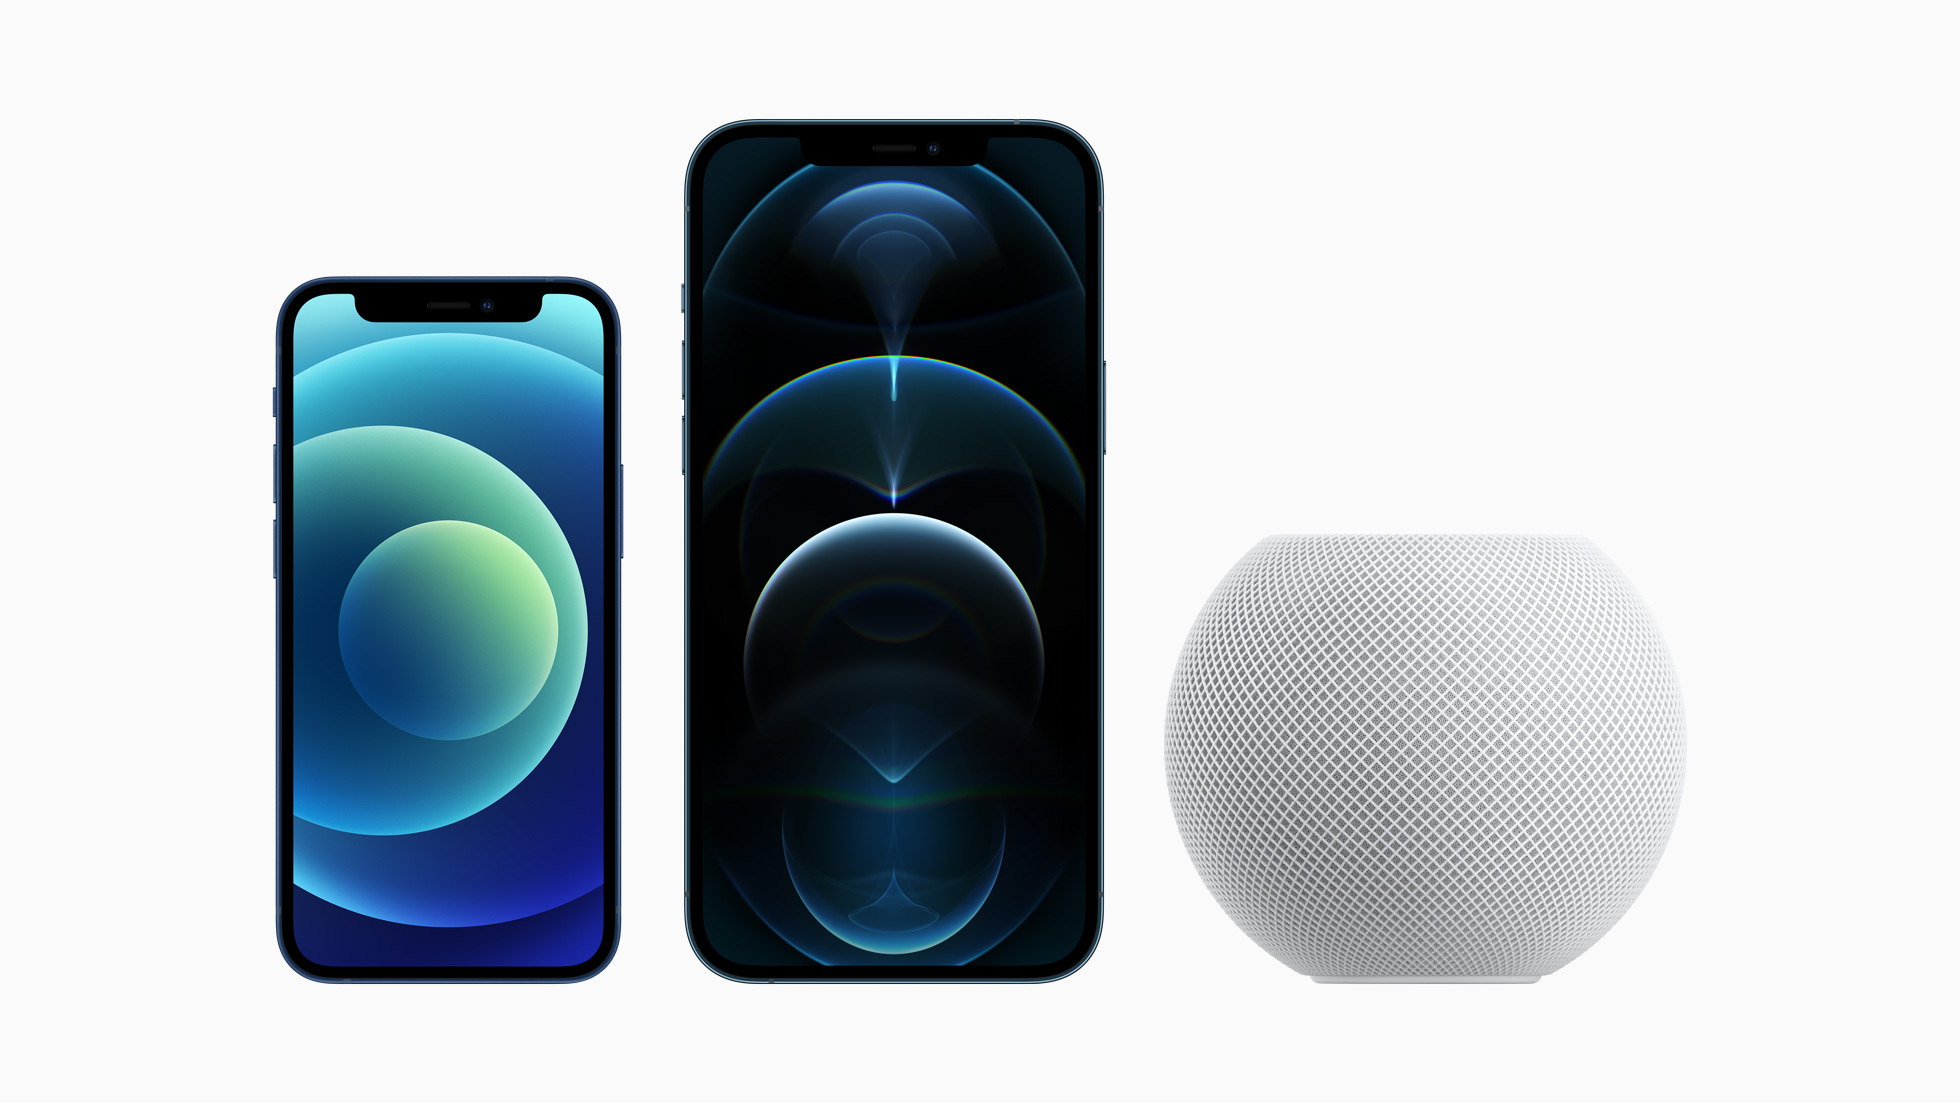 iPhone 12 Pro Max, iPhone 12 mini, and HomePod mini available to order